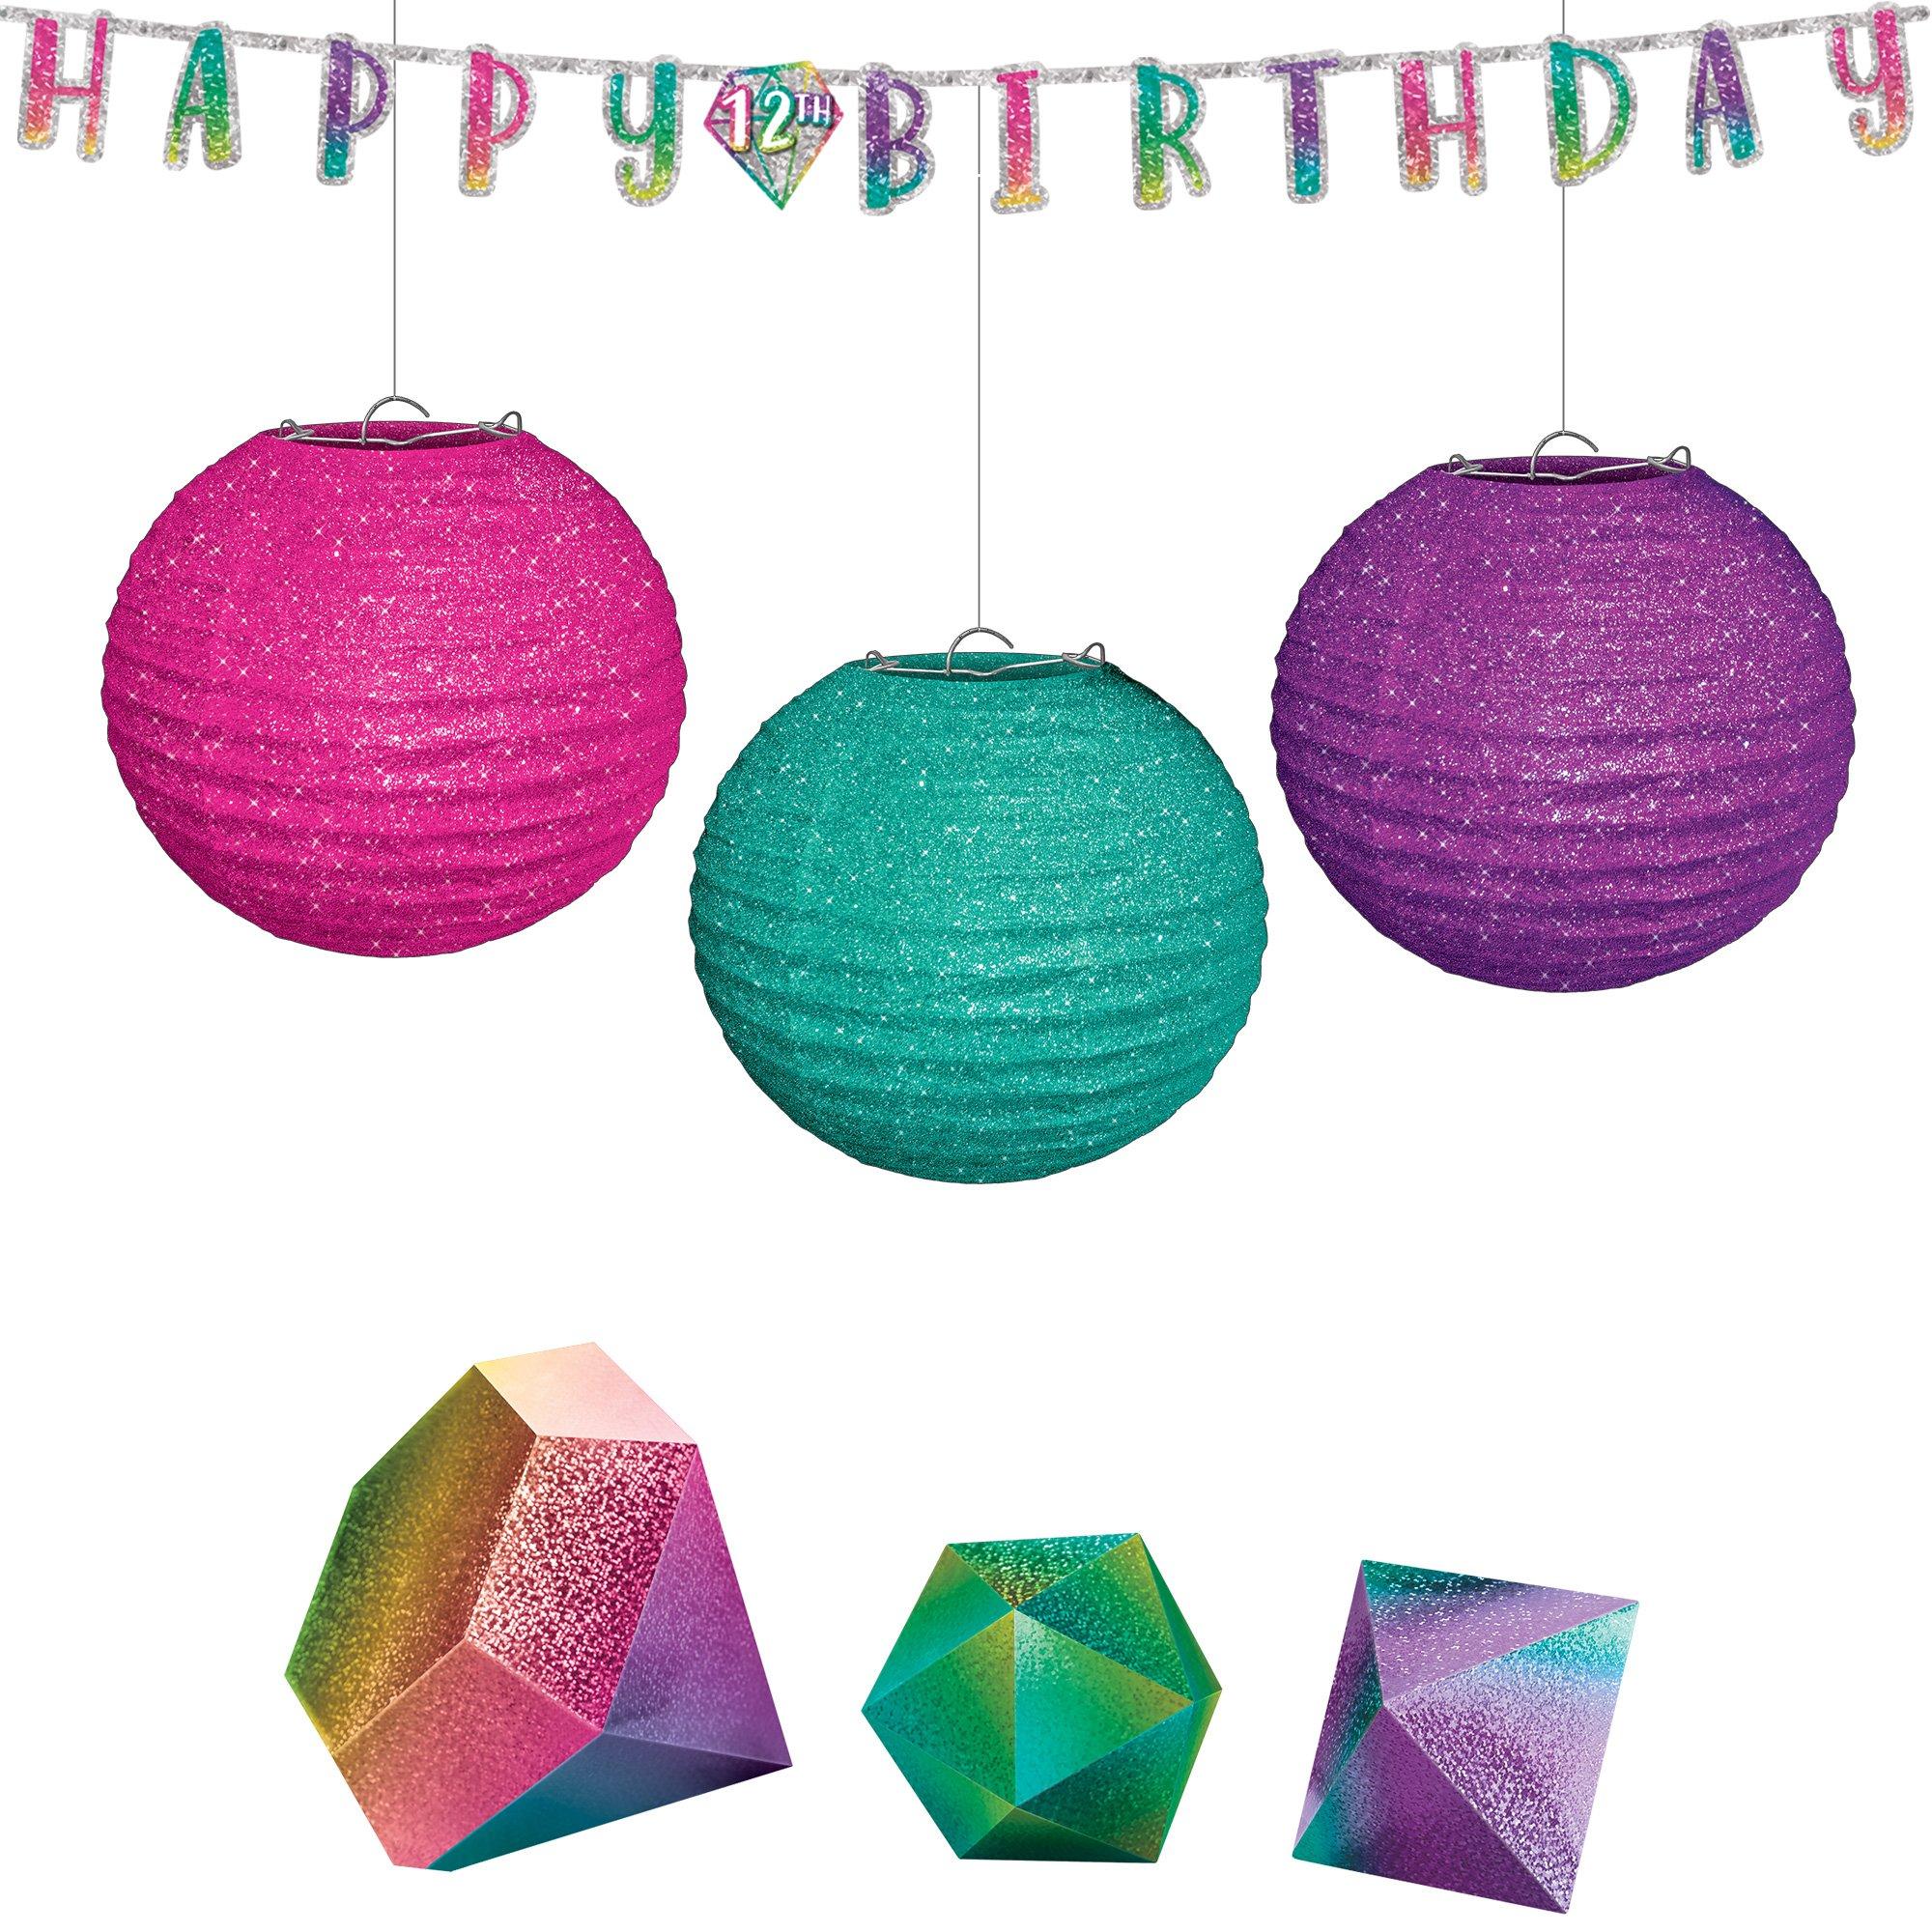 Sparkle Birthday Party Decorating Supplies Pack - Kit Includes Banner, Lantern & Table Decorations